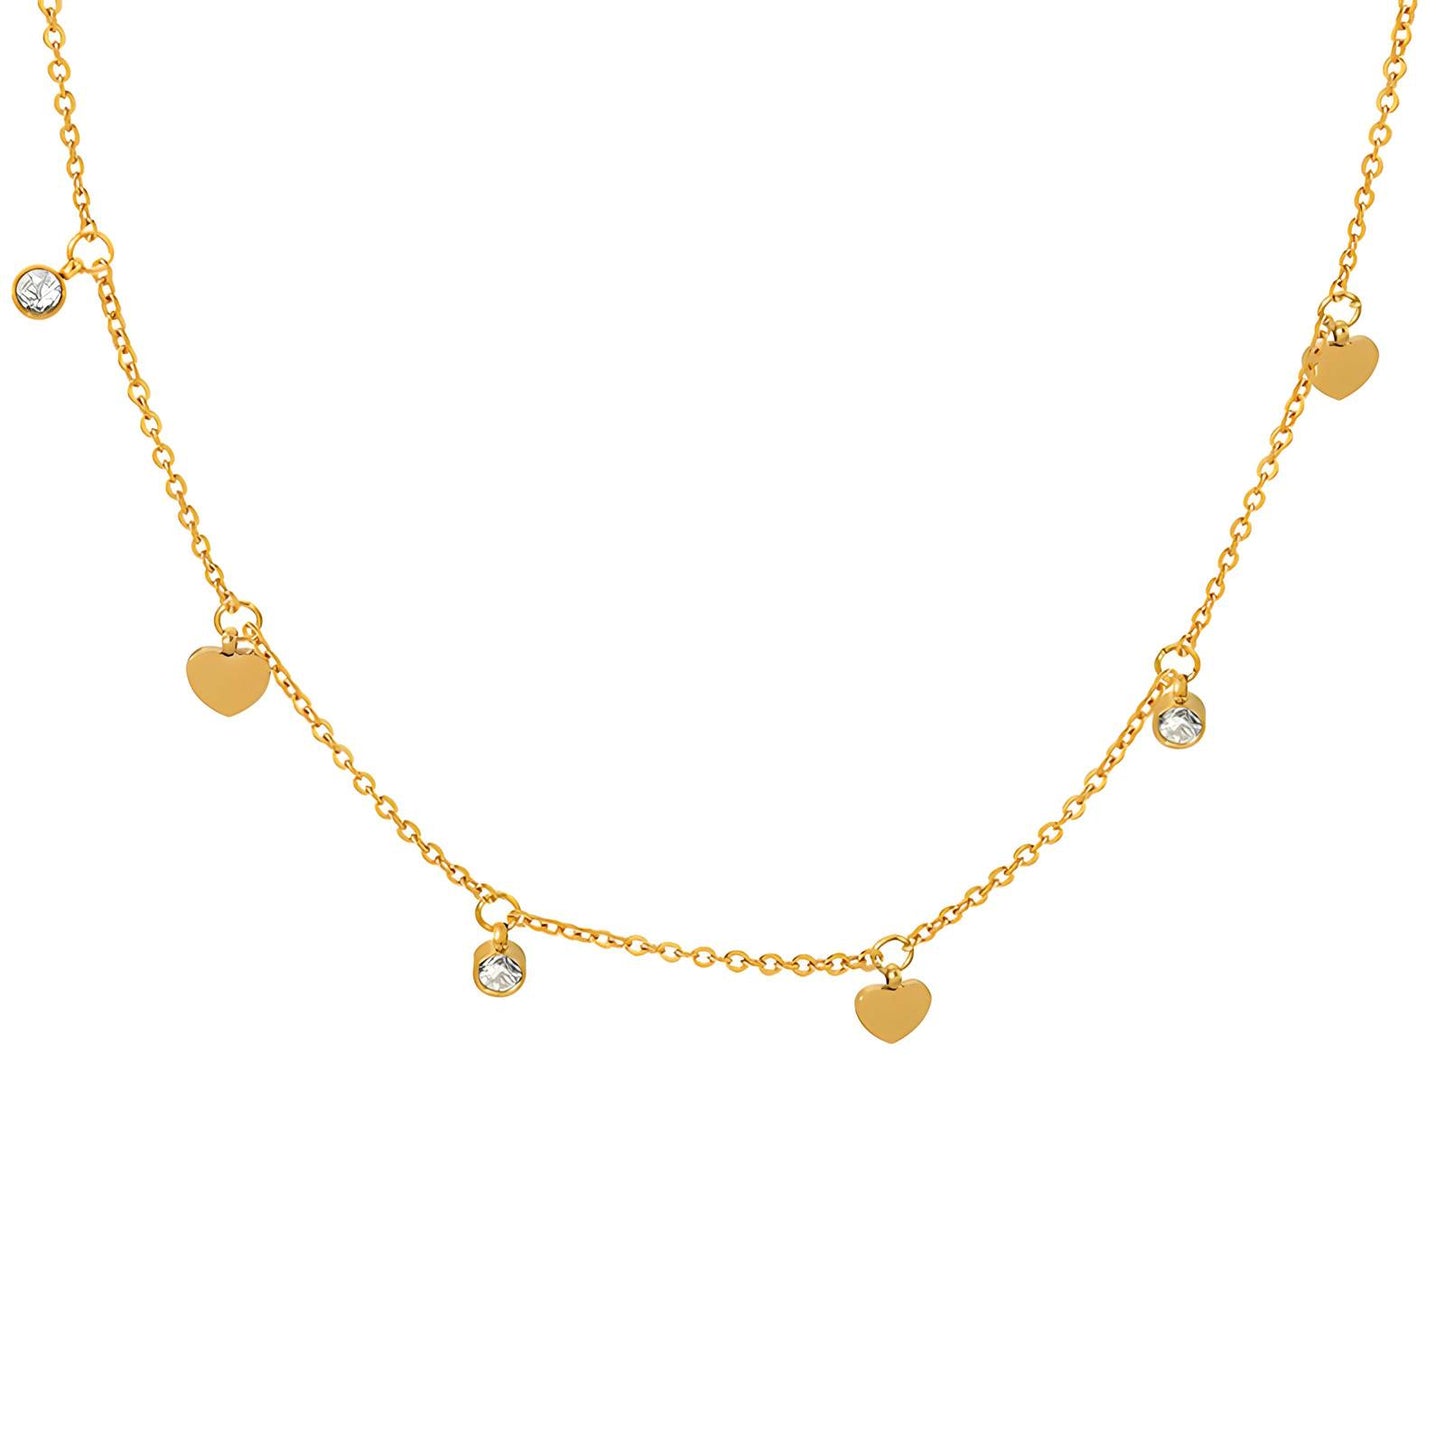 18K gold plated Stainless steel  Hearts necklace